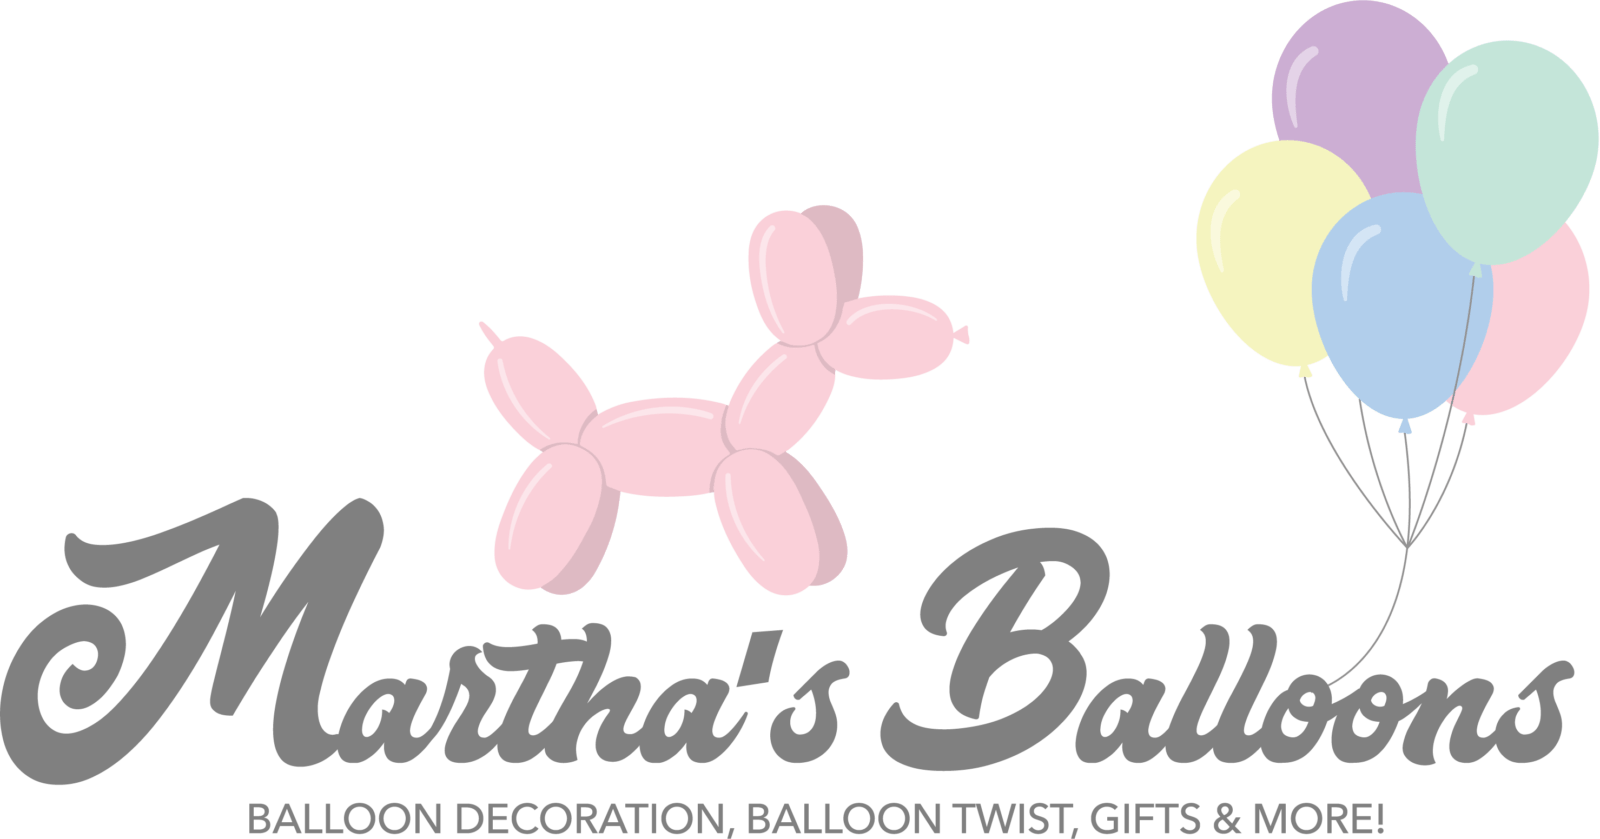 Balloon Decoration-Balloon Decoration, Balloon Twist, Gifts & More!